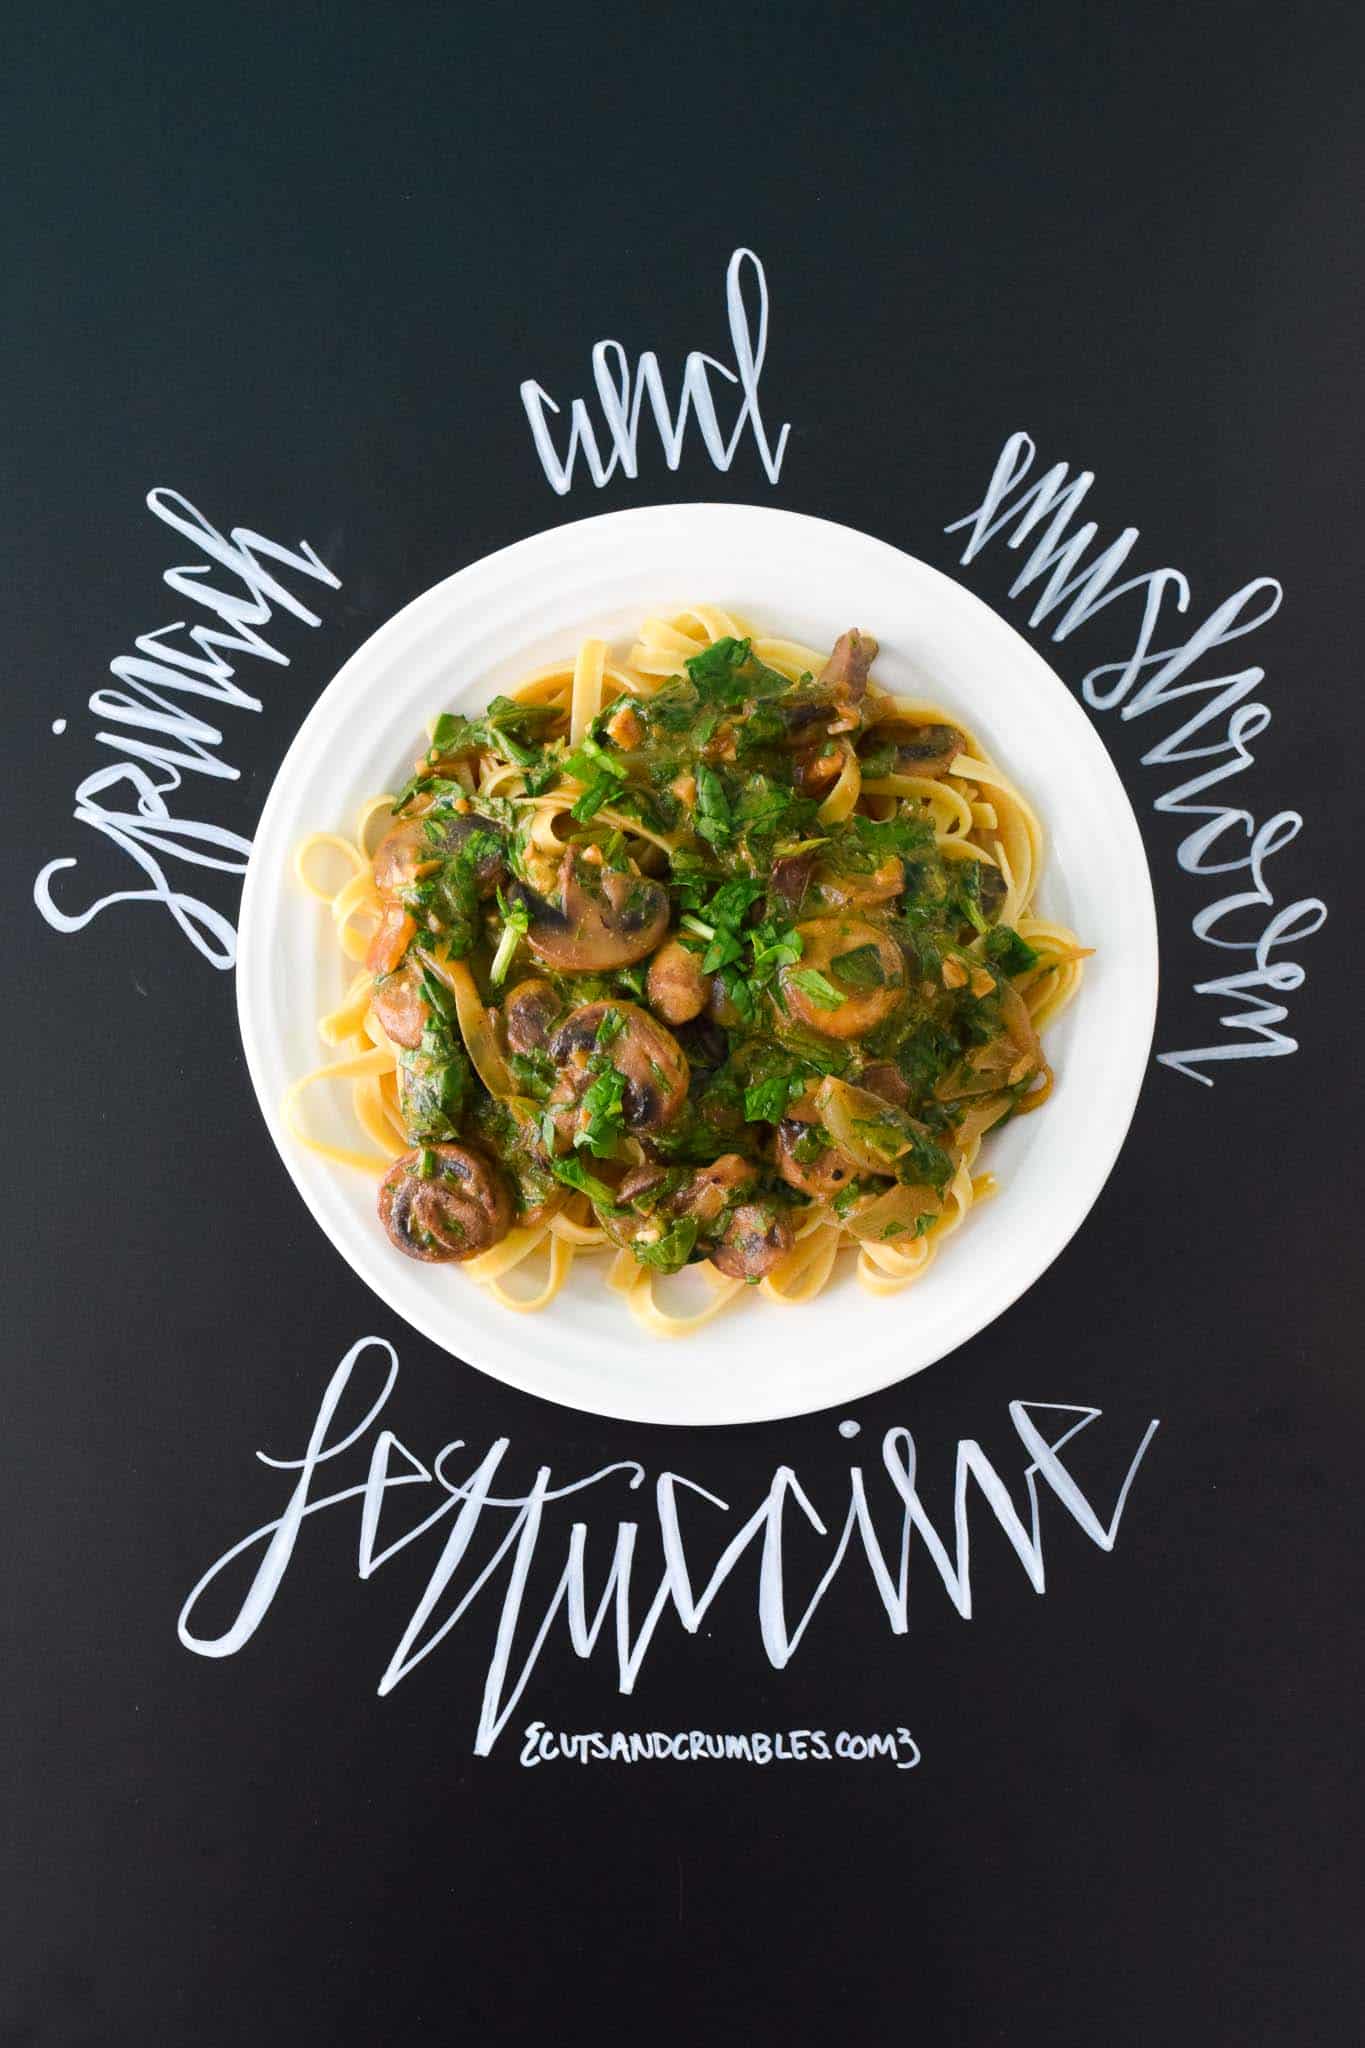 Spinach and Mushroom Fettuccine with title written on chalkboard